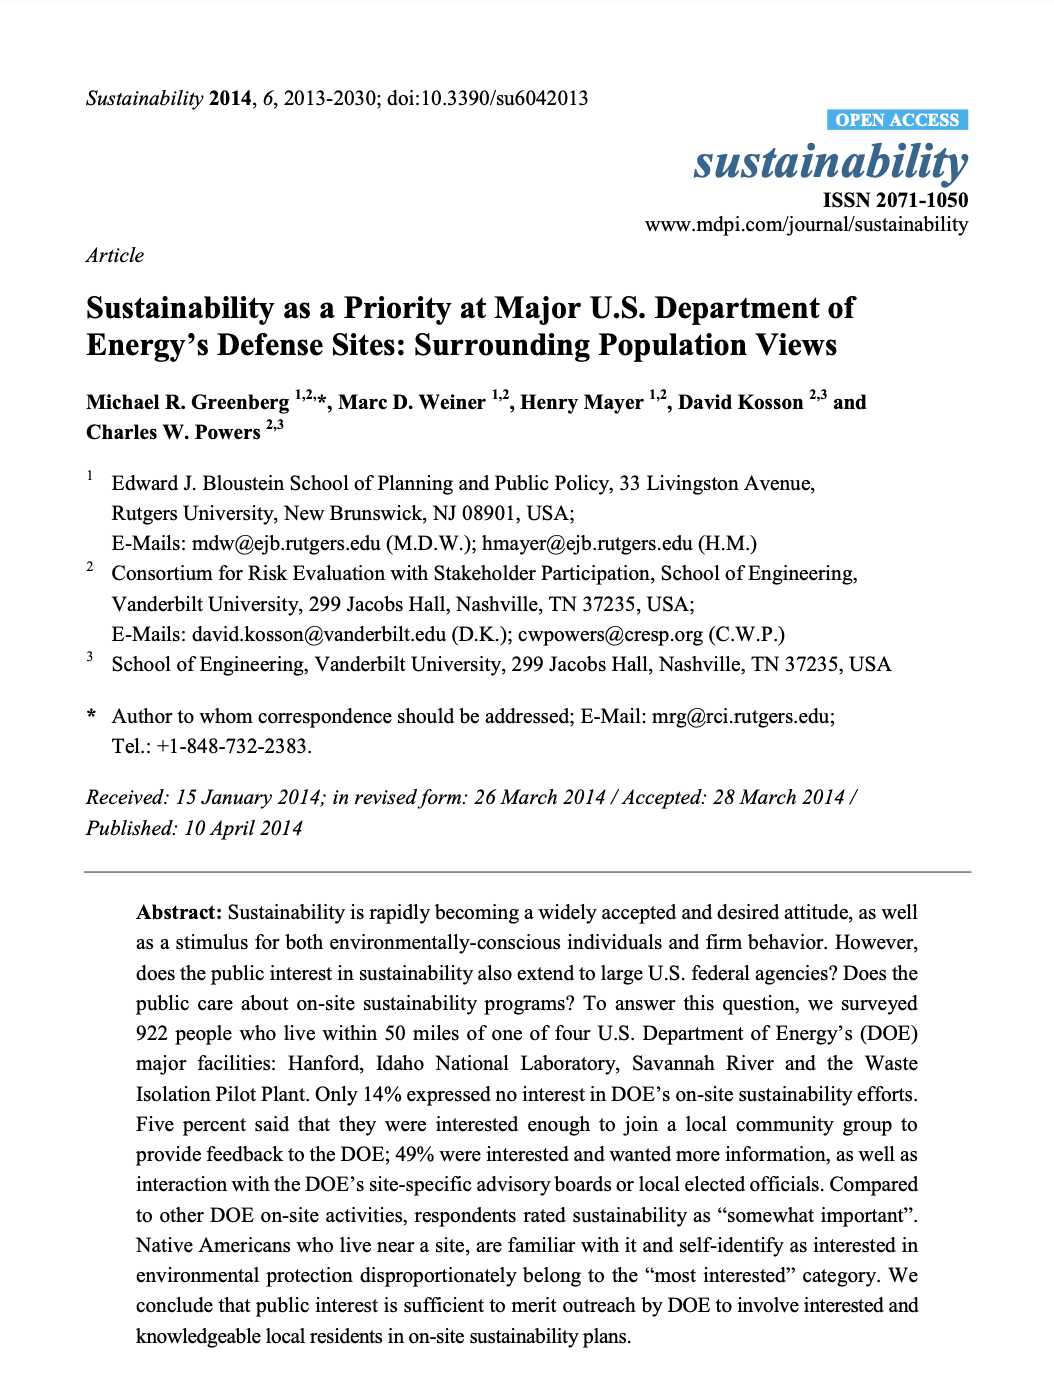 Sustainability as a Priority at Major U.S. Department of Energy’s Defense Sites: Surrounding Population Views